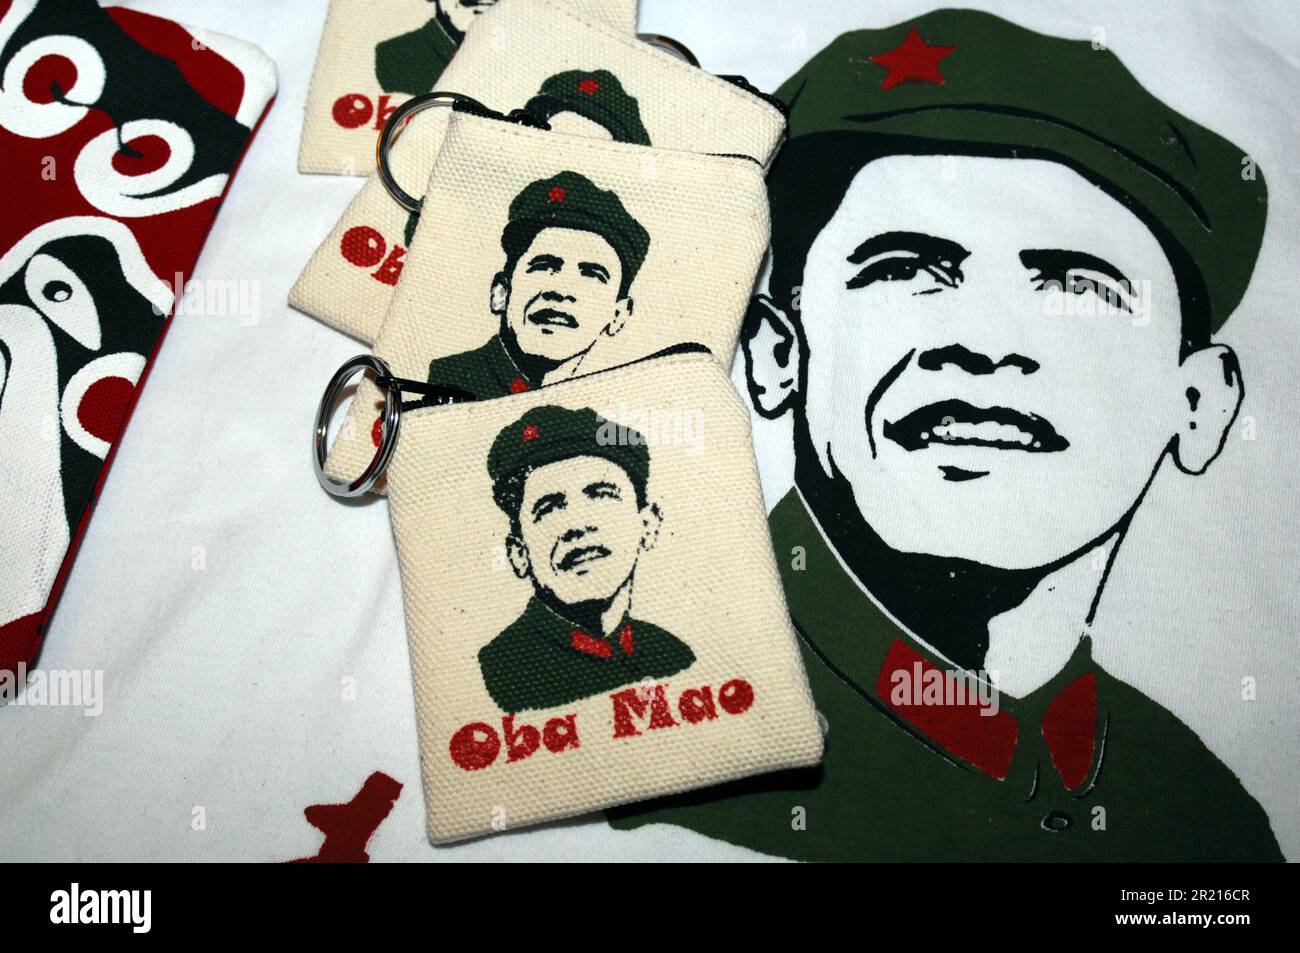 Beijing, China - Obamao t-shirts and coin purses on sale at a shop in Beijing. They were designed by Liu Mingjie, who goes by the adopted English name Stefan. Depicting US President Obama in Red guard uniform with the slogan 'Serve the People Stock Photo